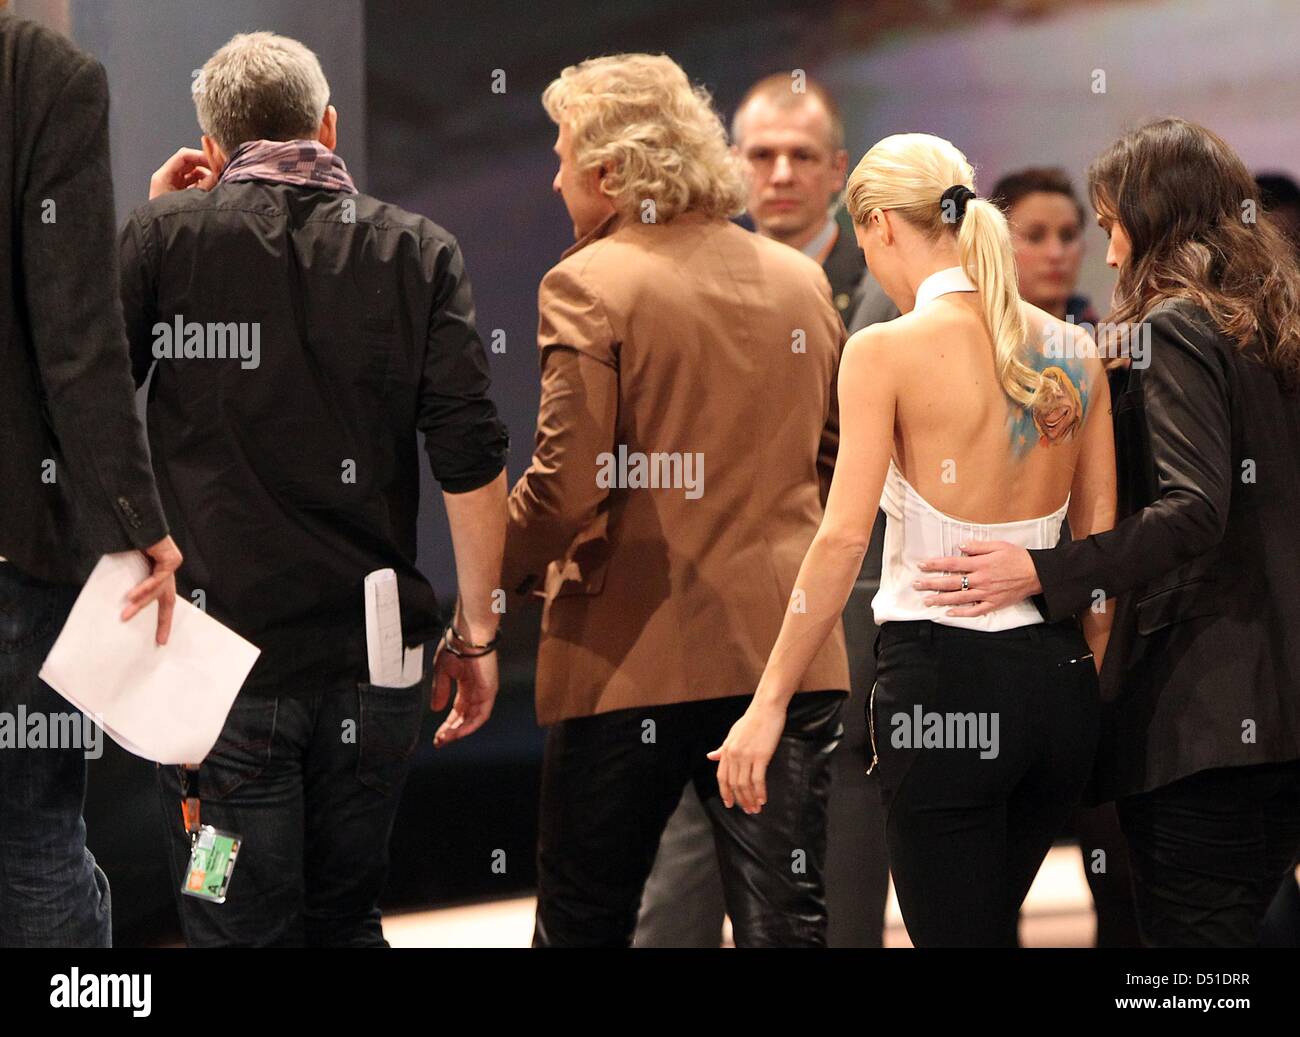 TV moderators Thomas Gottschalk and Michelle Hunziker leave the "Wetten,  dass...?" stage after an accident during the show in Duesseldorf, Germany,  4 December 2010. Bet candidate Samuel Koch had tried to jump